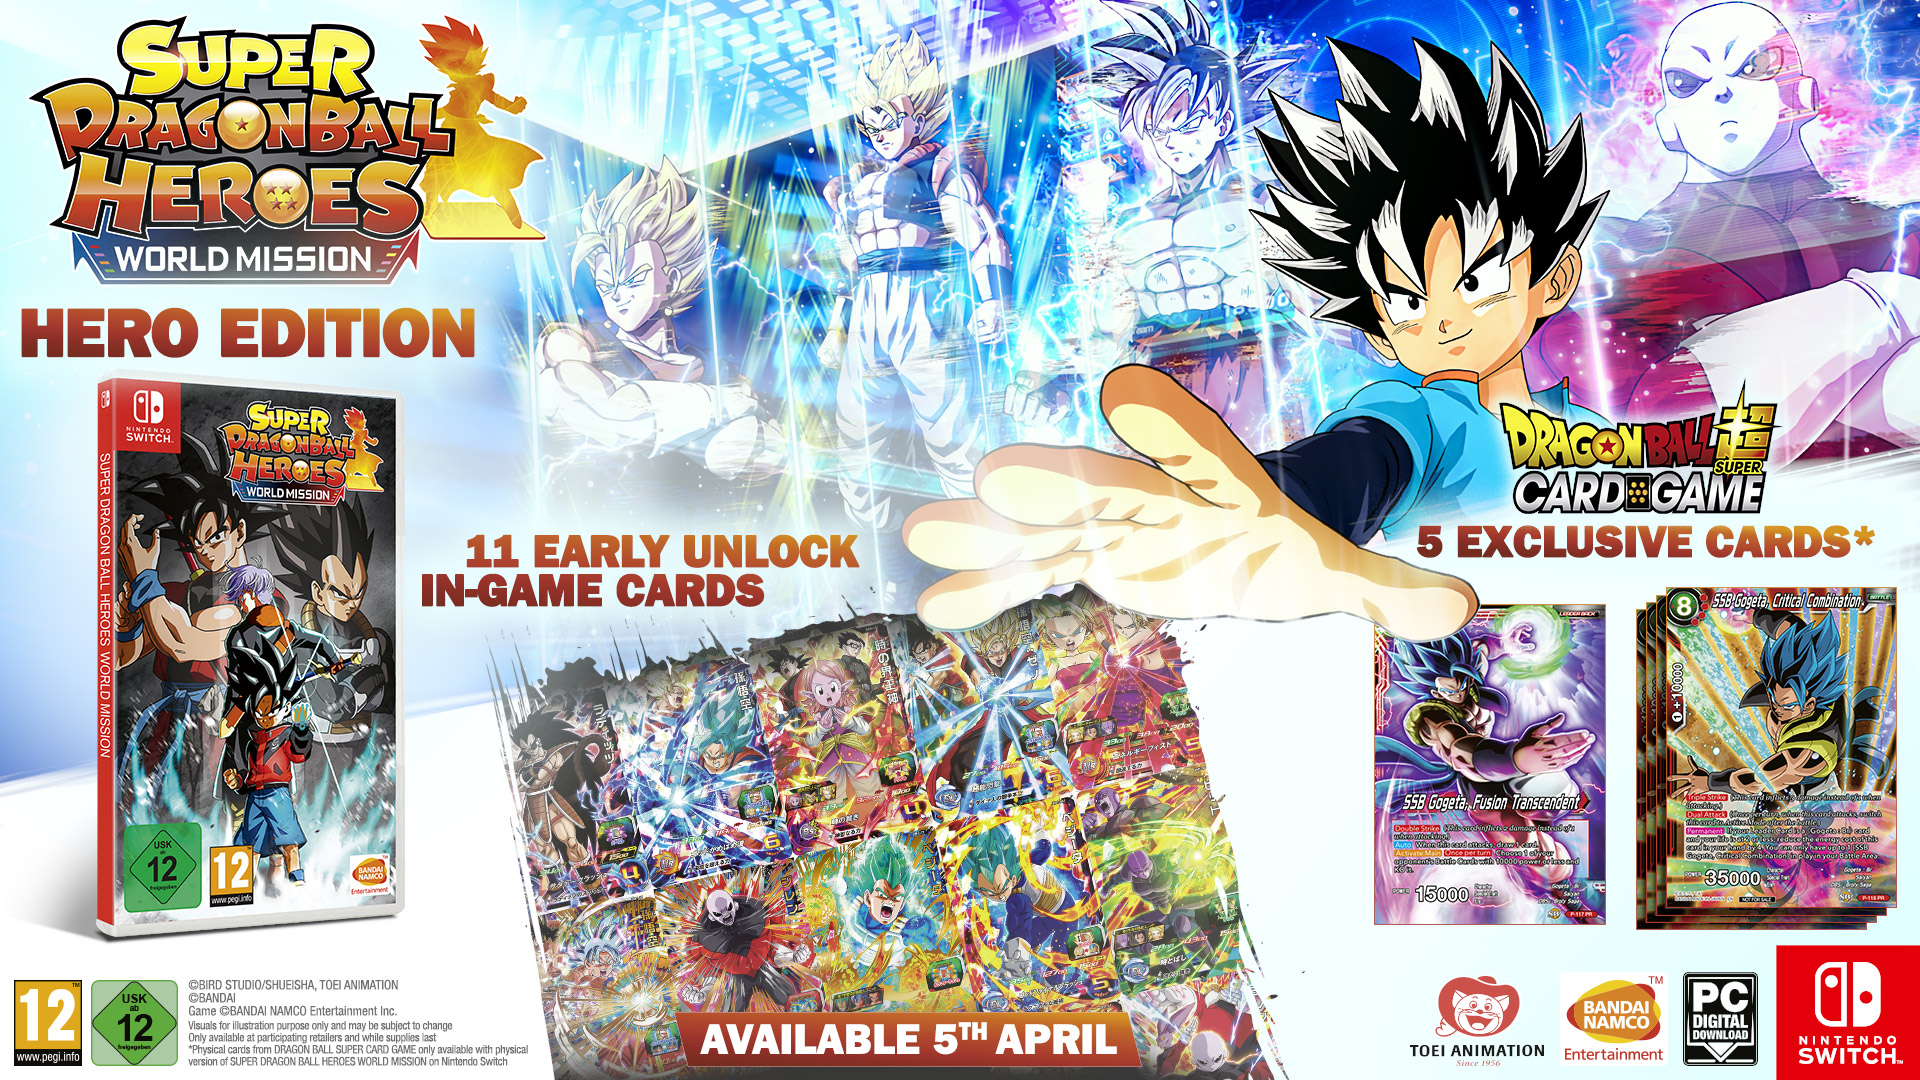 Super Dragon Ball Heroes World Mission Event